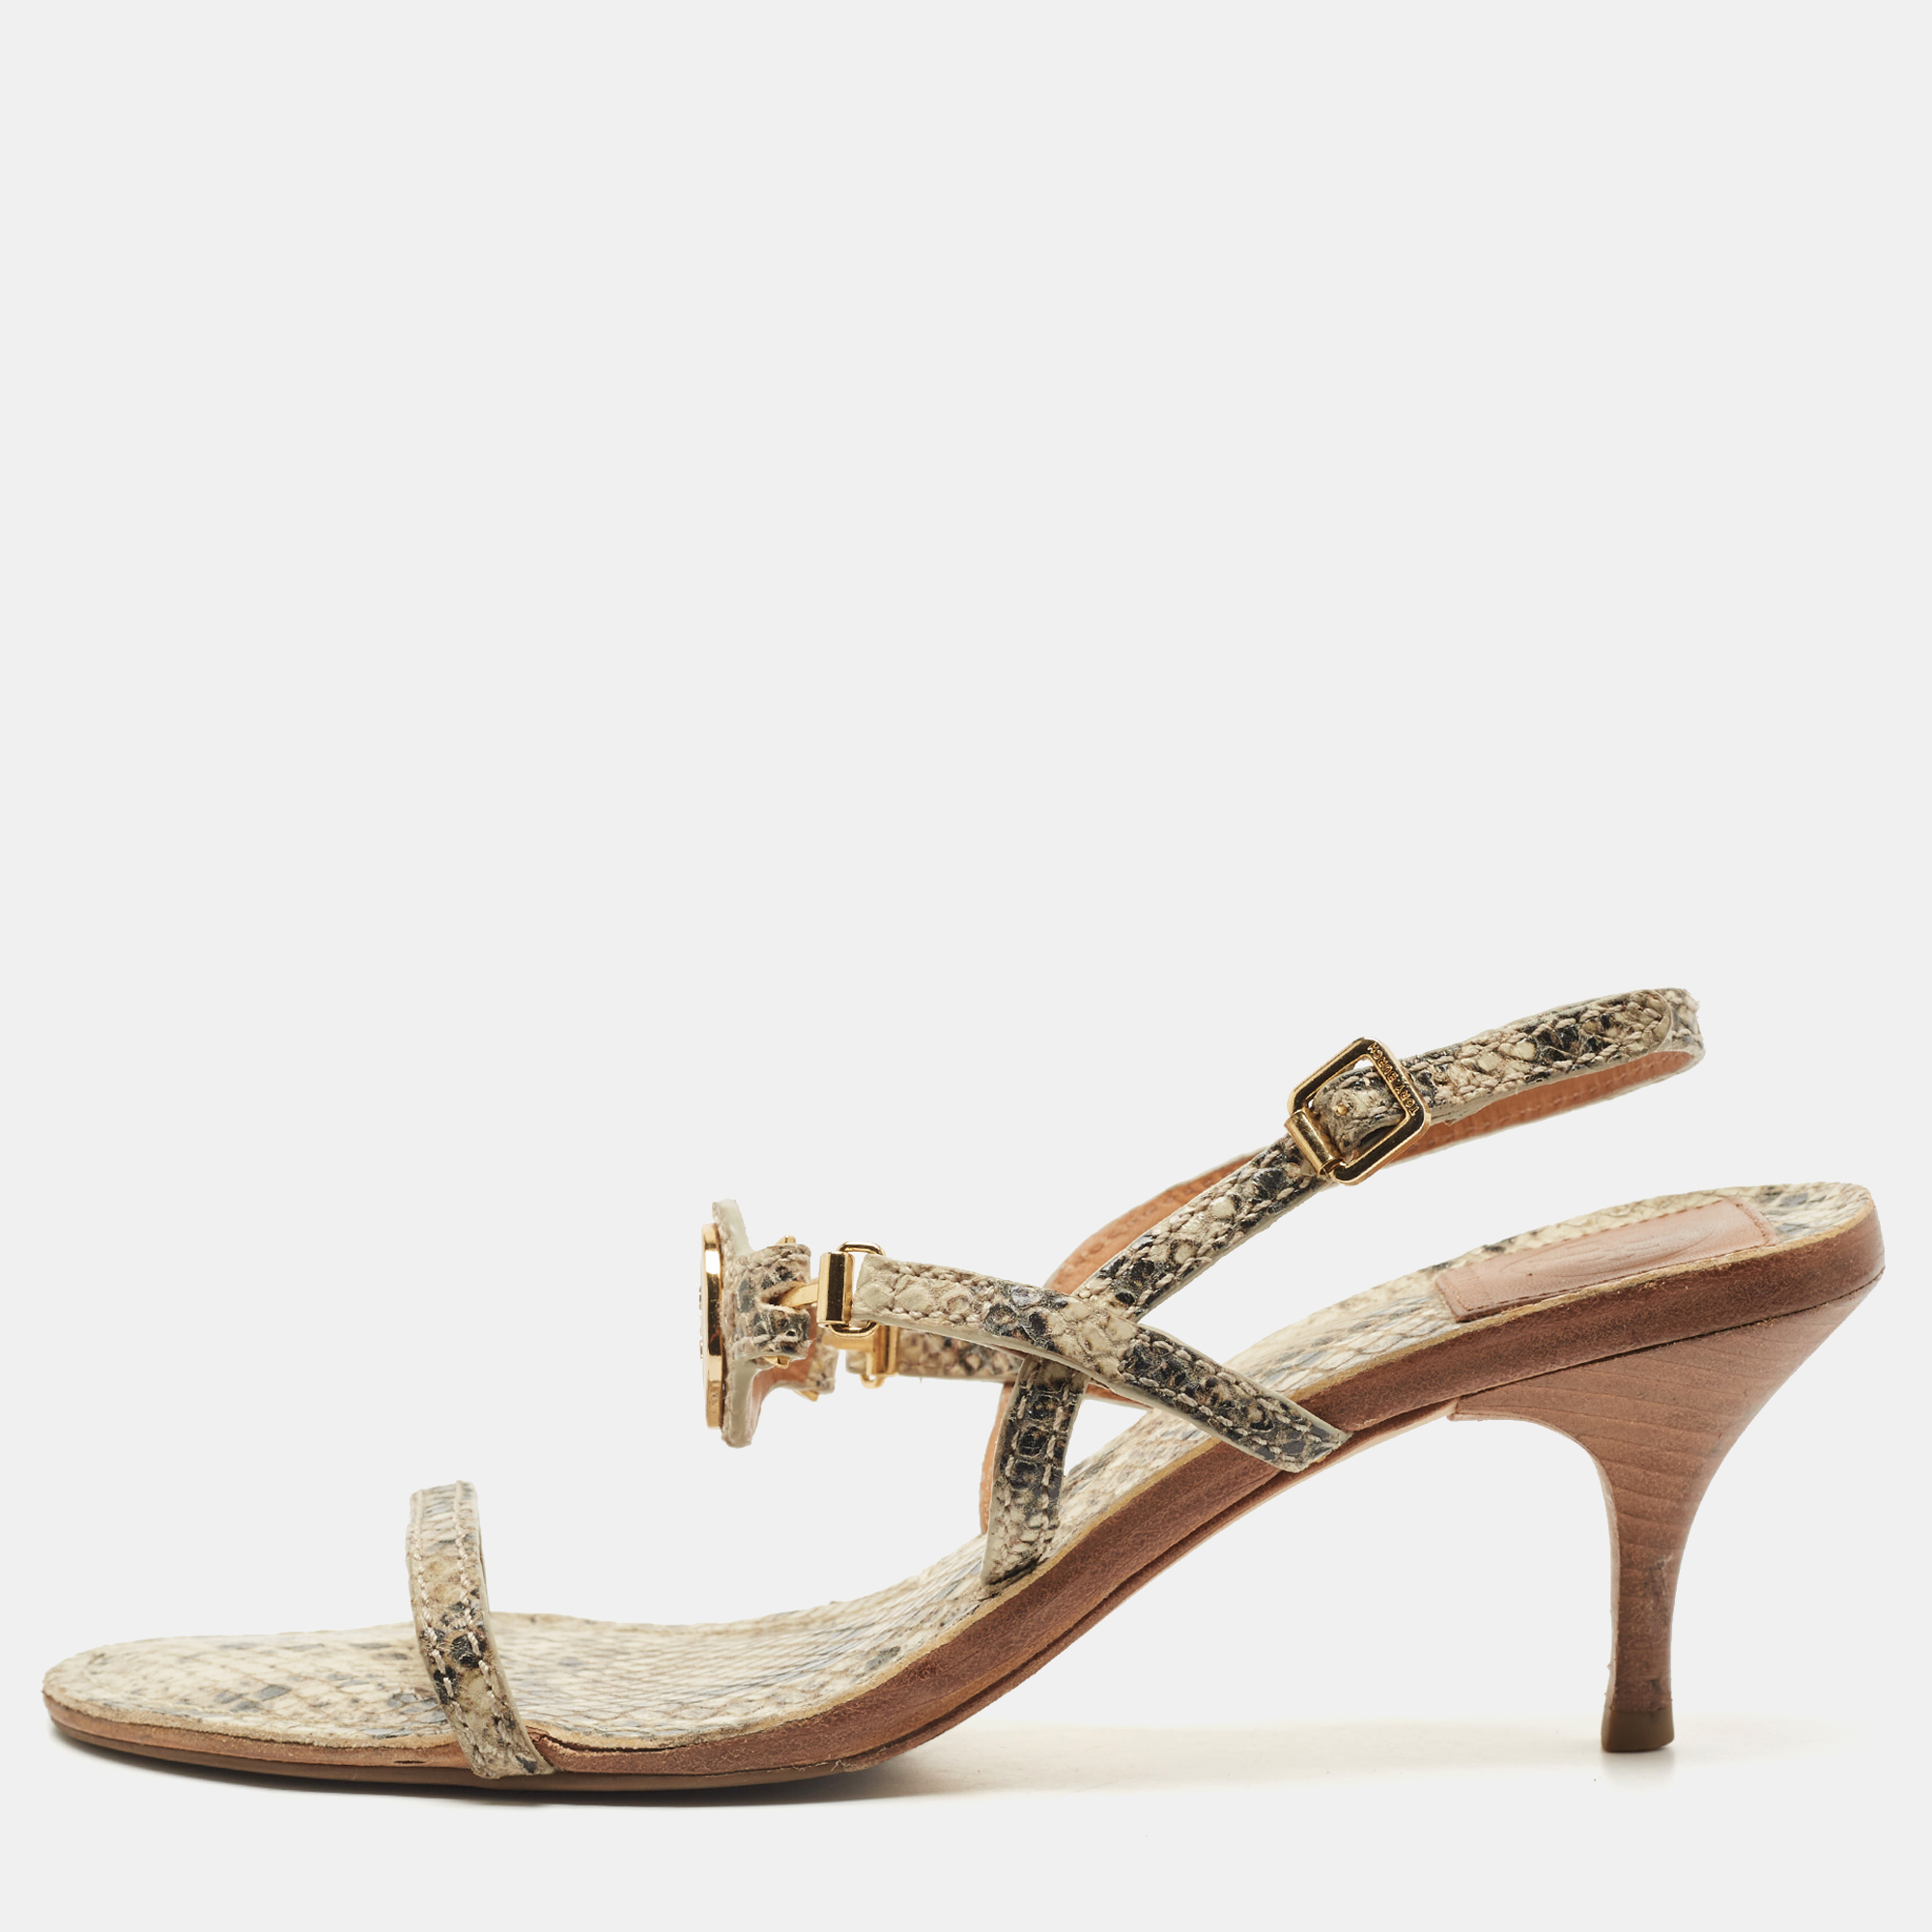 Tory Burch Beige/Black Python Embossed Ankle Strap Sandals Size 39.5